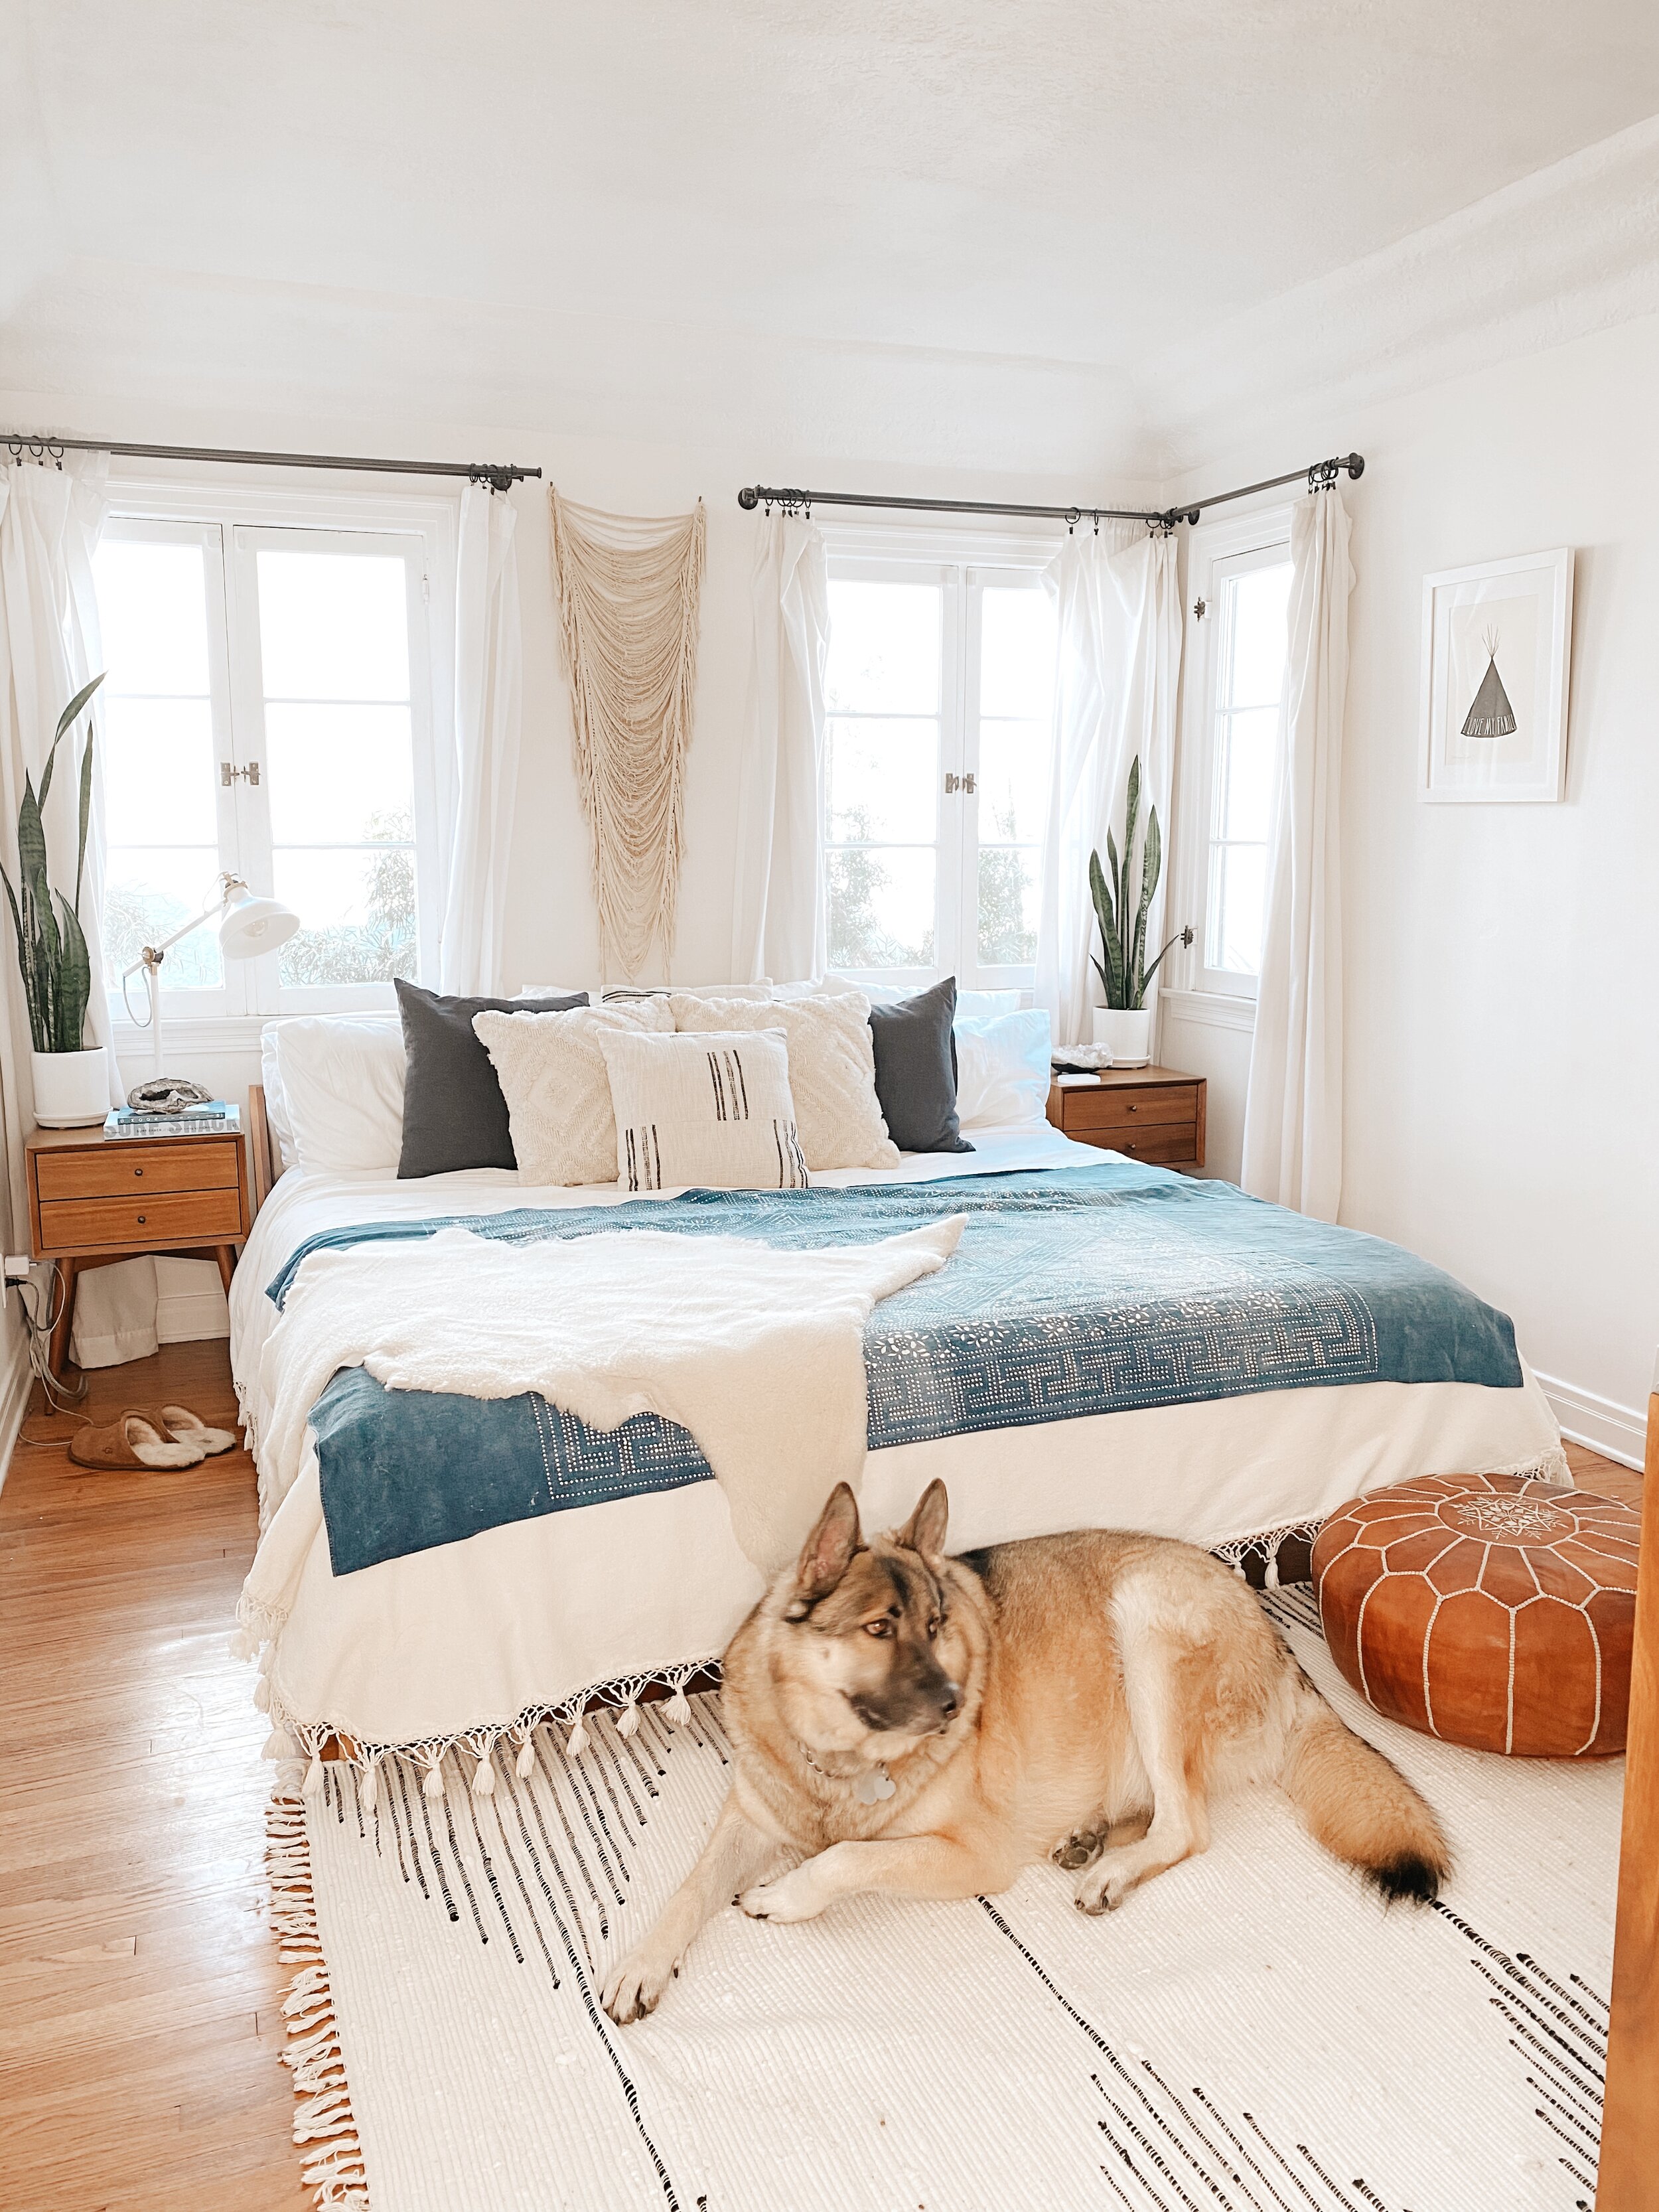 CAN A WHITE RUG, TWO DOGS, AND A TODDLER CO-EXIST? — Blanco Bungalow